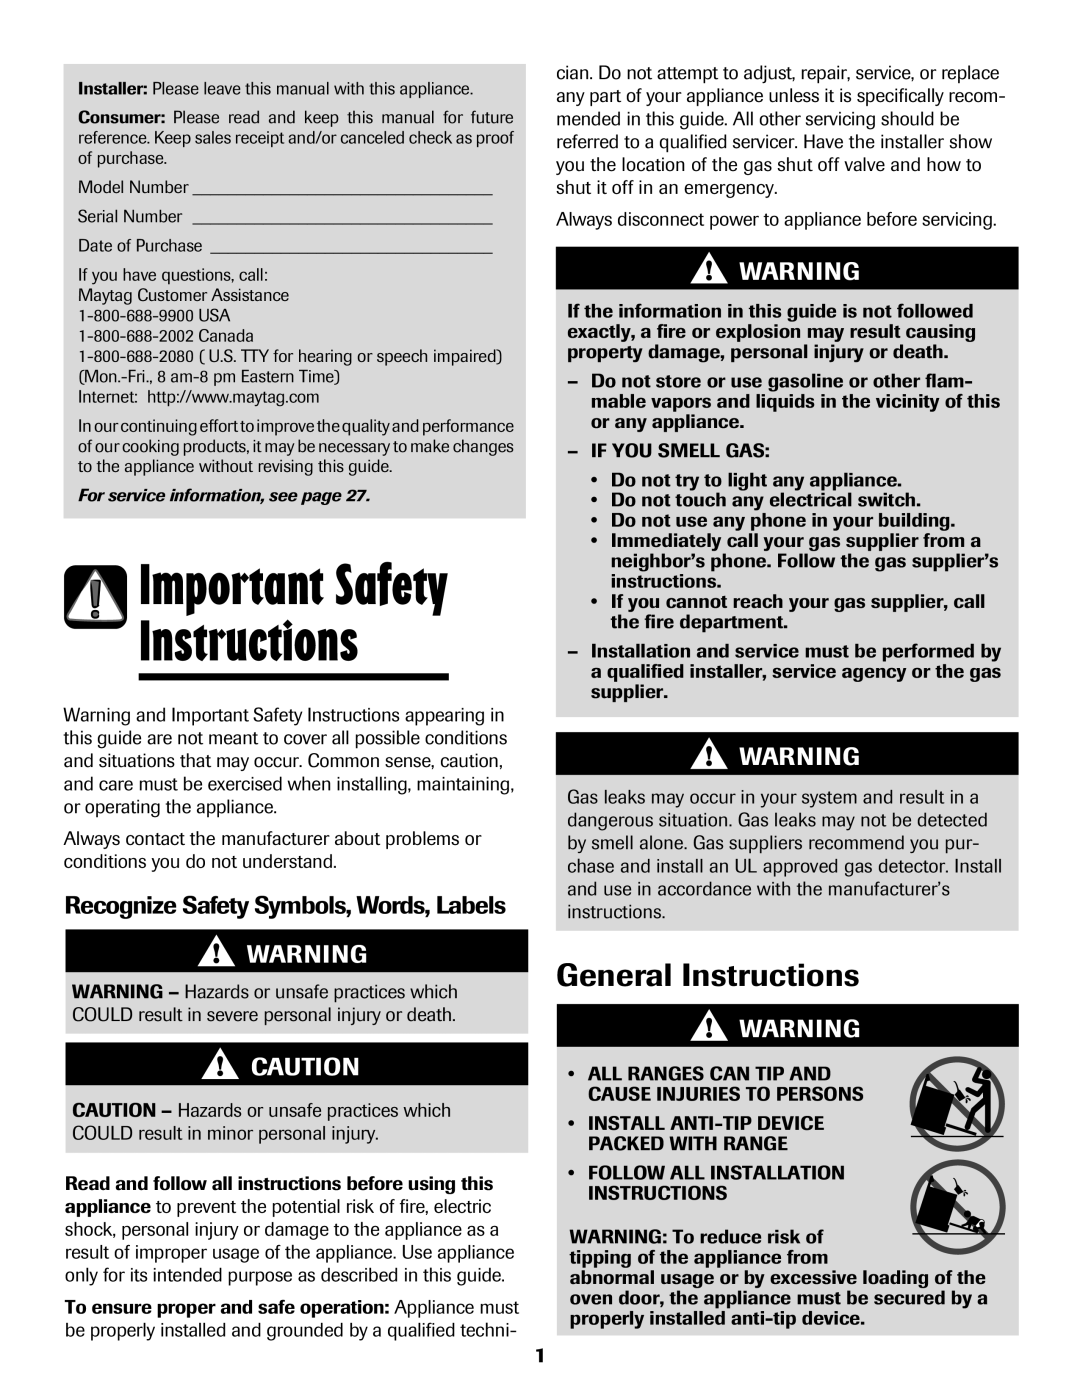 Maytag 8113P424-60 manual Important Safety, General Instructions, Recognize Safety Symbols, Words, Labels 